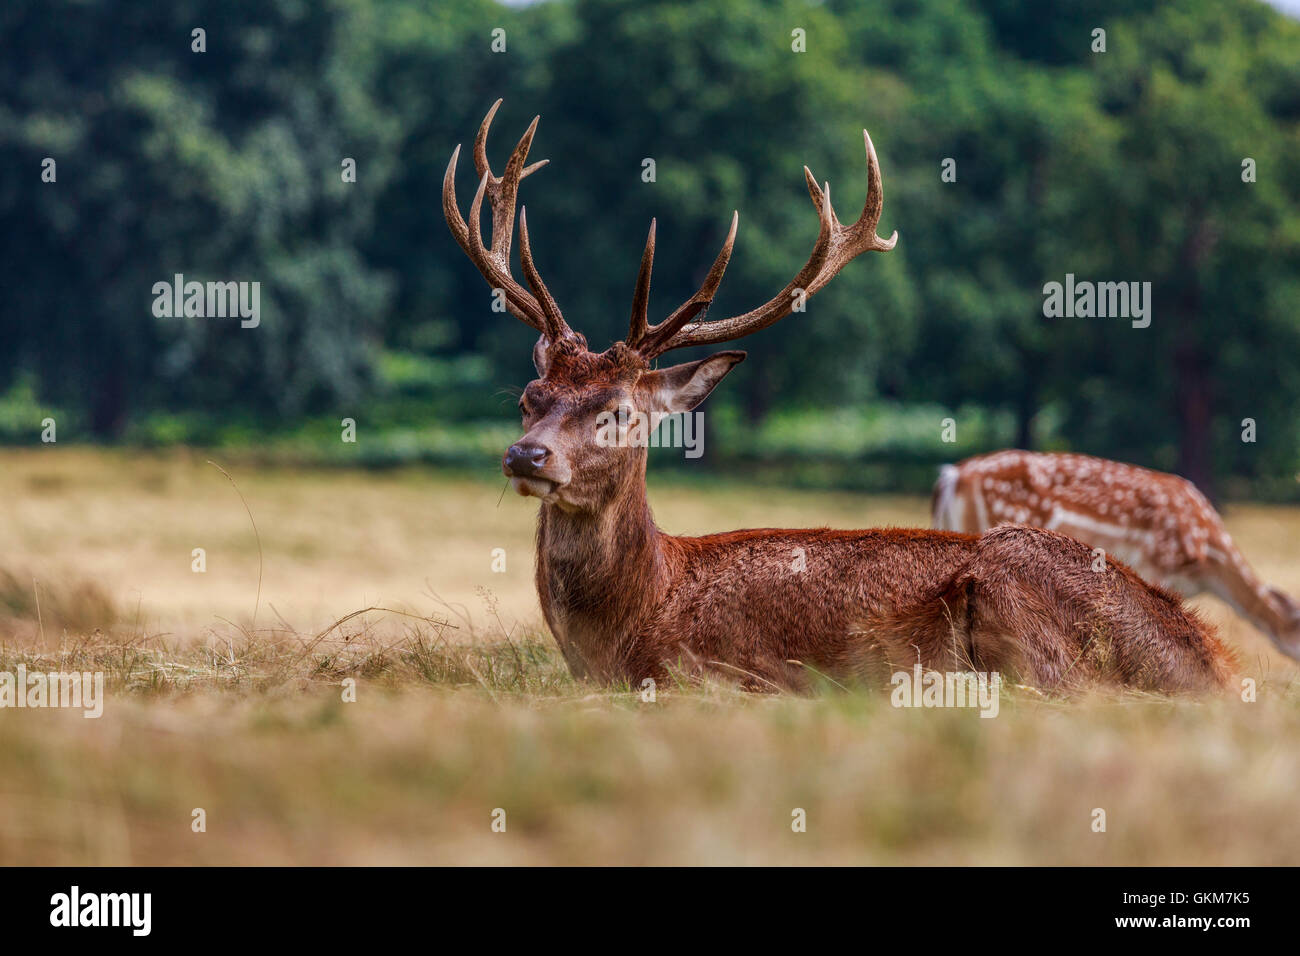 Deer enjoying a sunny day on a freshly cut grass in Royal Park Richmon on Thames London Stock Photo